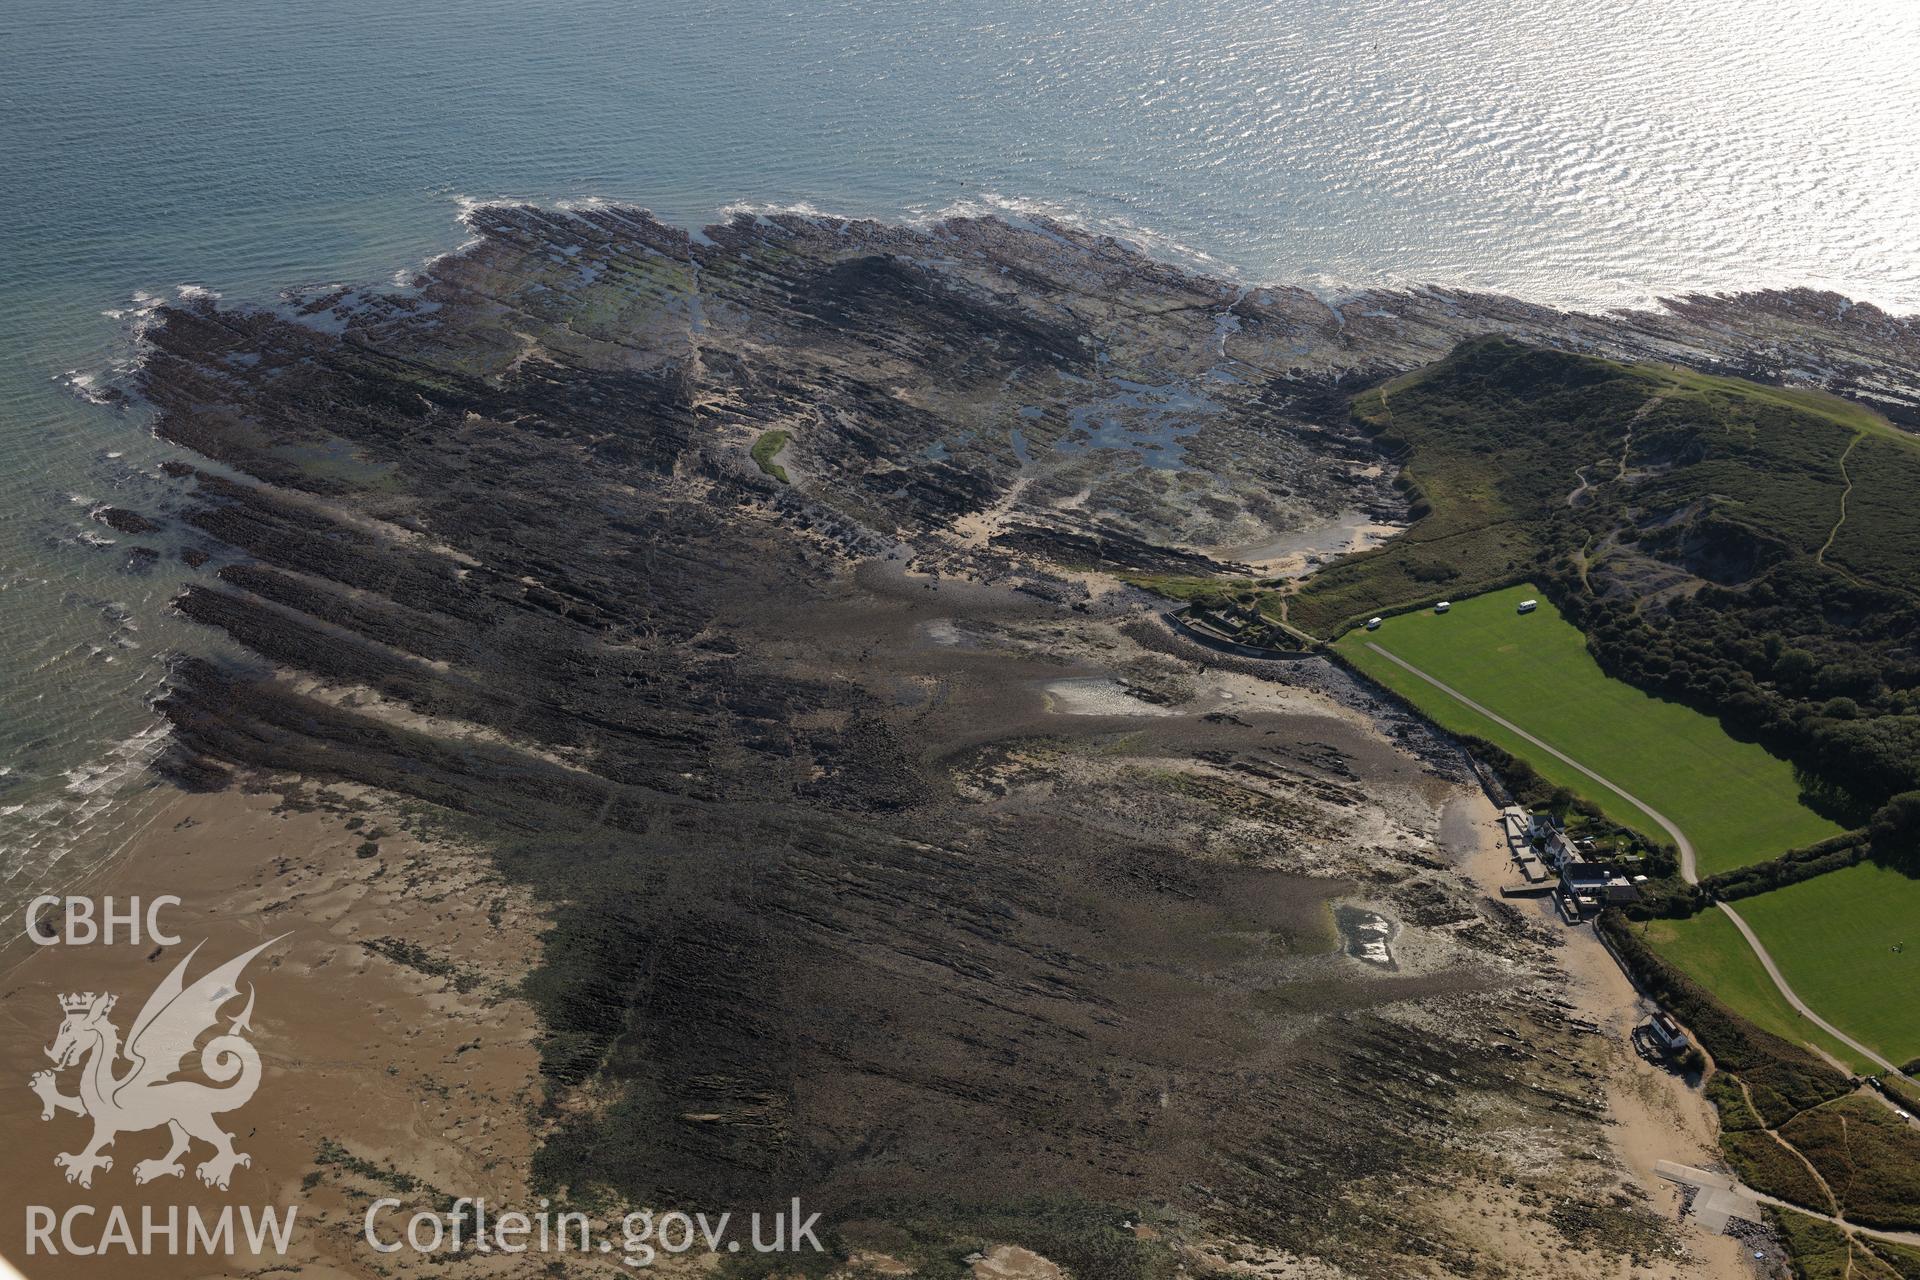 Port Eynon campsite & Port Eynon salt house, on the southern shores of the Gower Peninsula at Port Eynon Bay. Oblique aerial photograph taken during Royal Commission's programme of archaeological aerial reconnaissance by Toby Driver on 30th September 2015.